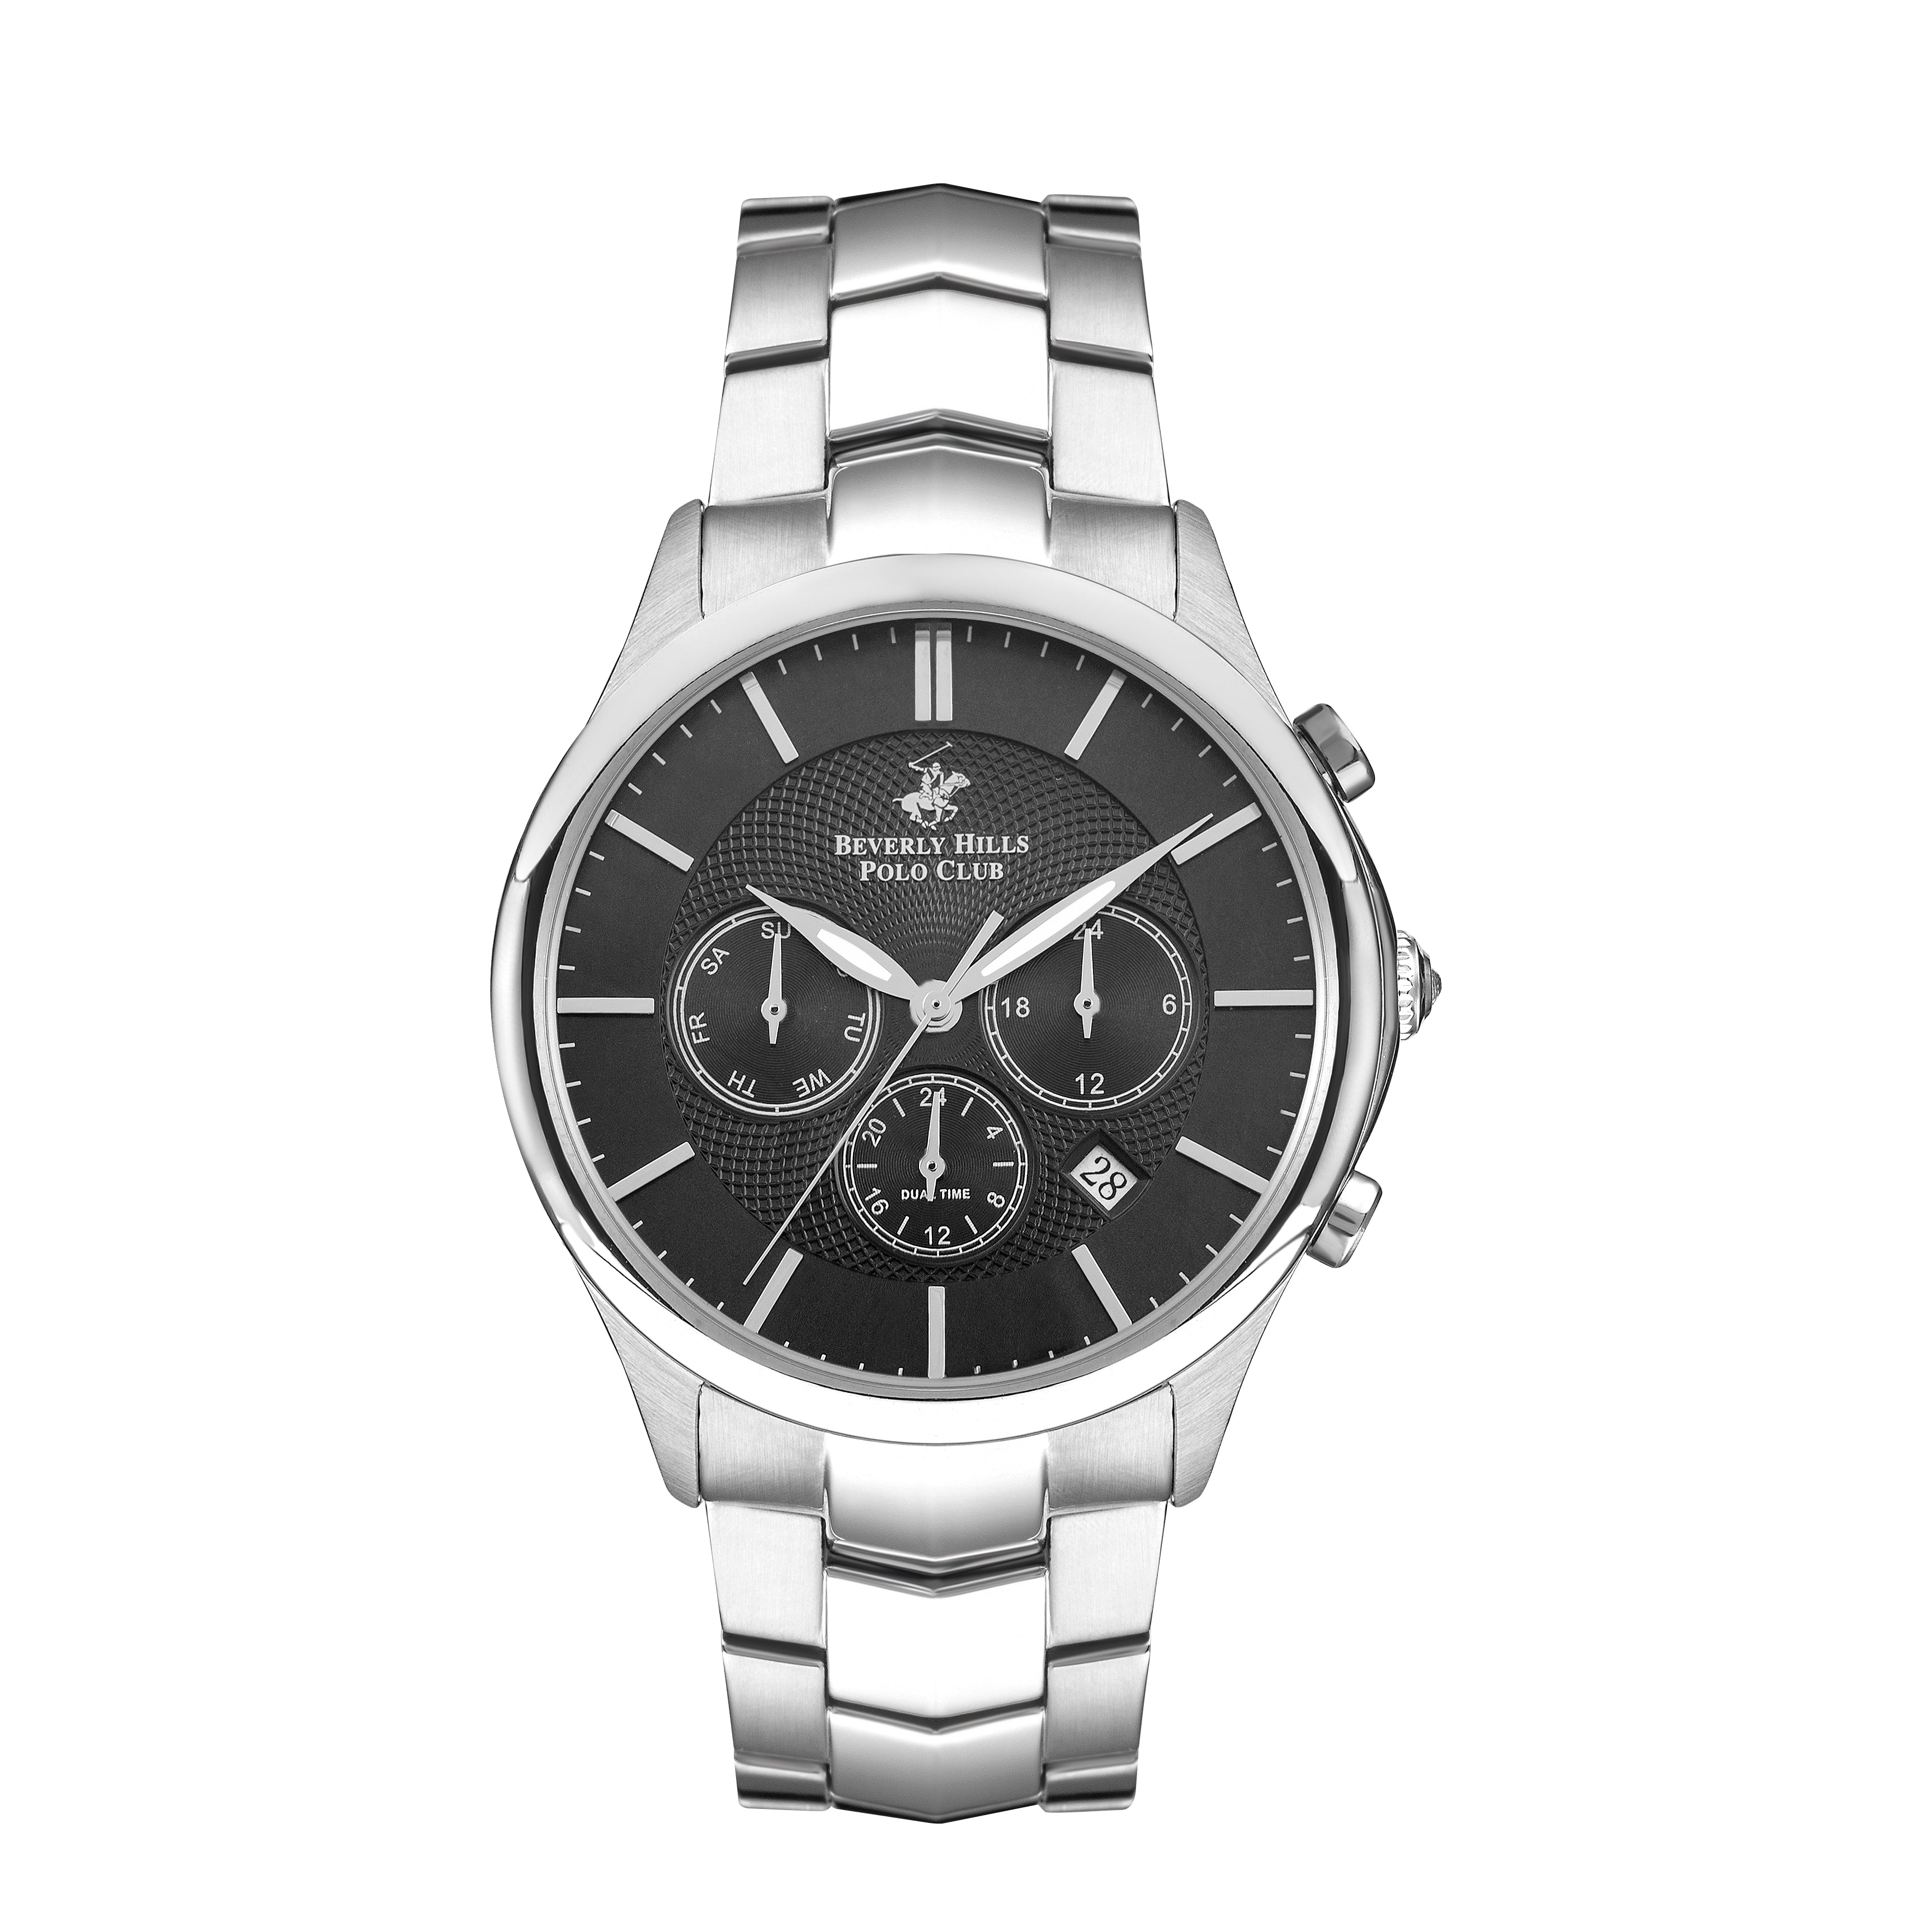 Polo - BP3232X.350 - Mens Stainless Steel Watch